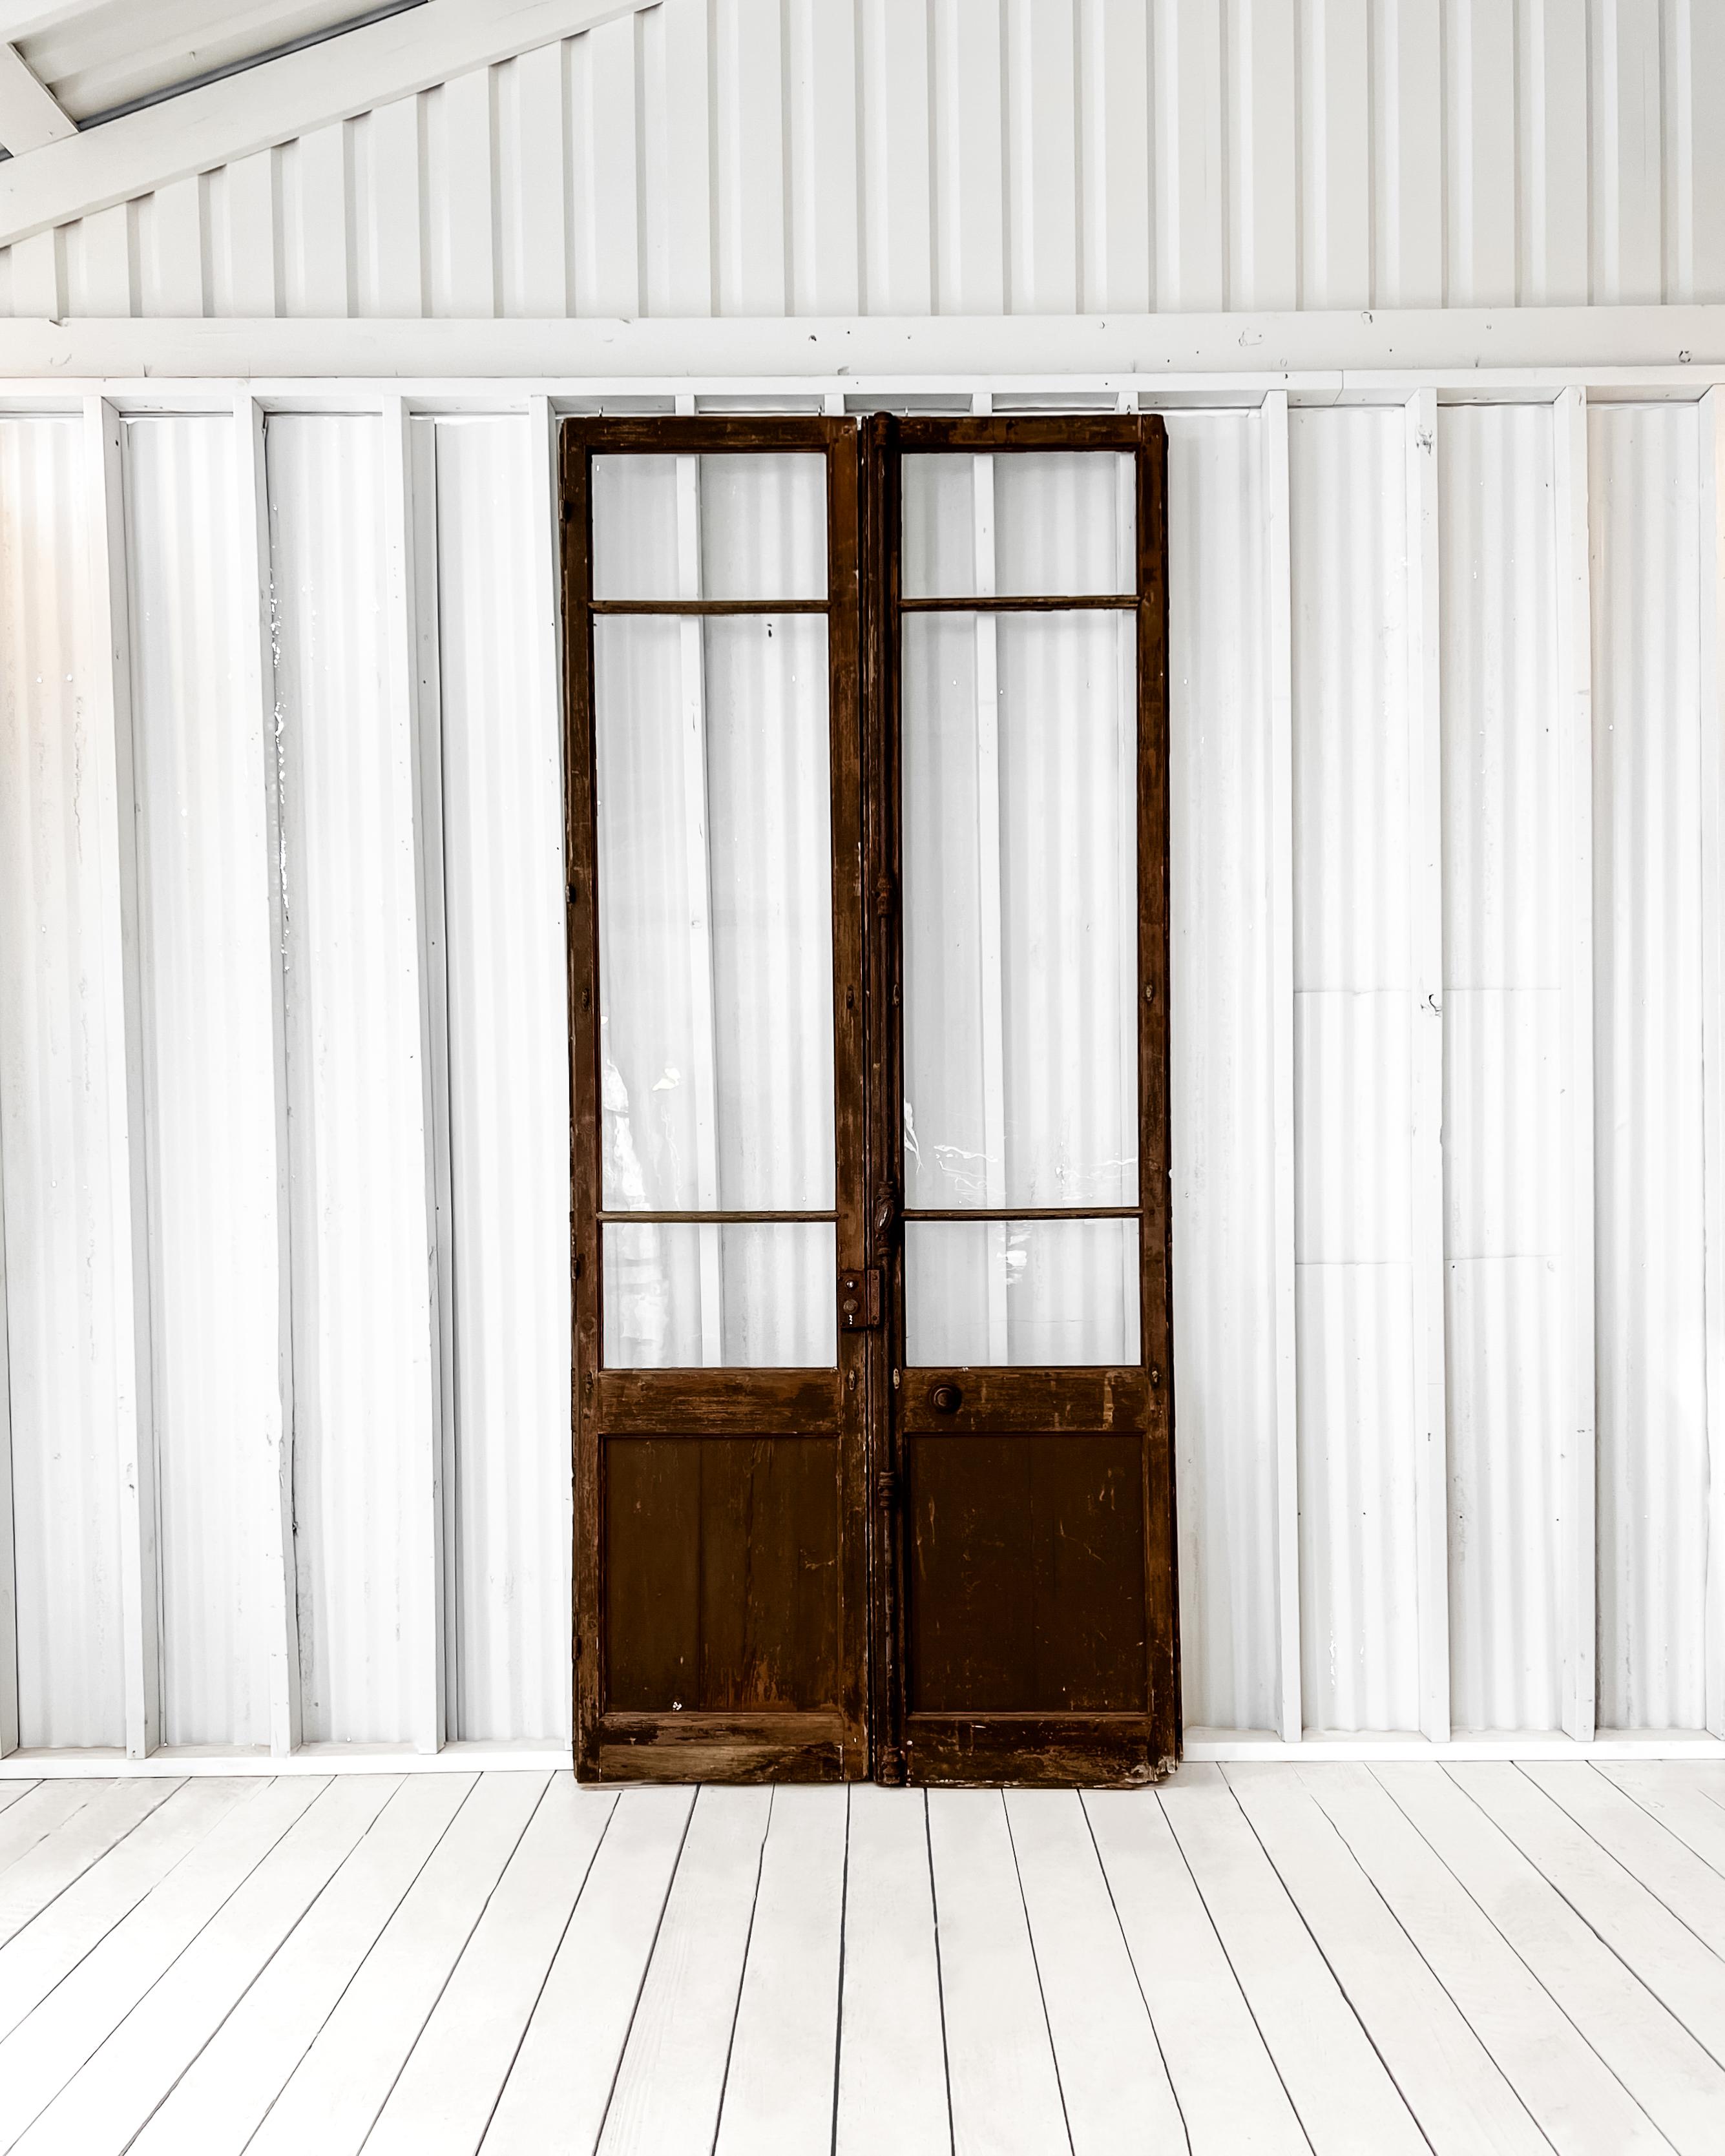 Found in France, dating to the late 18th century, from a prominent chateau, this pair of 3 lite panel doors retain their original glass, although one has suffered a crack. The original espresso paint has worn and weathered beautifully over time.